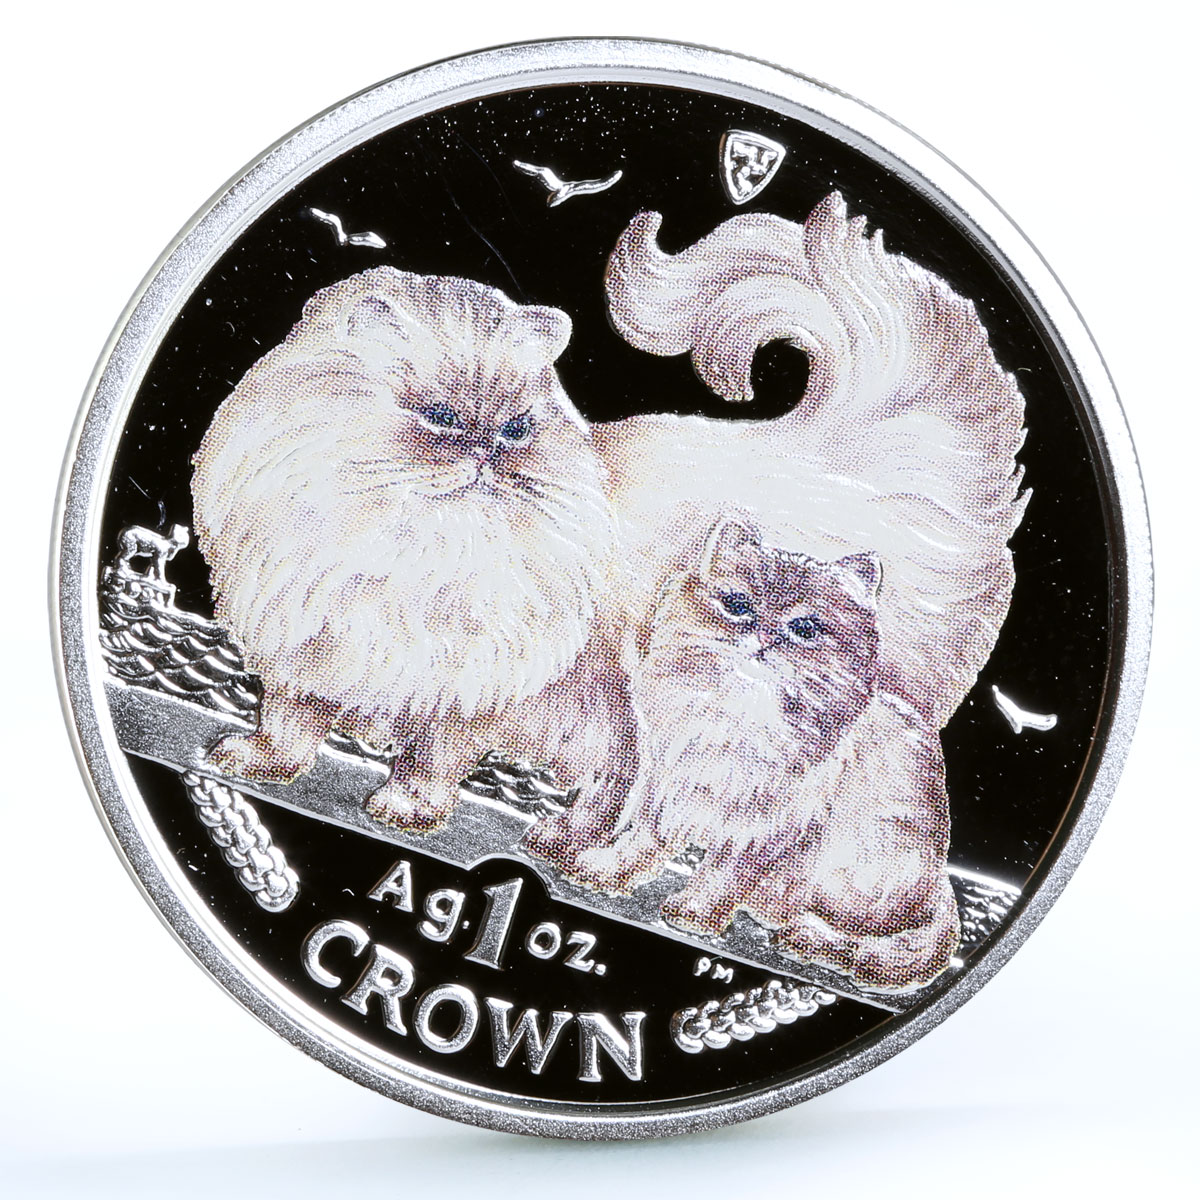 Isle of Man 1 crown Home Pets Two Chinchilla Cats Animals proof silver coin 2009